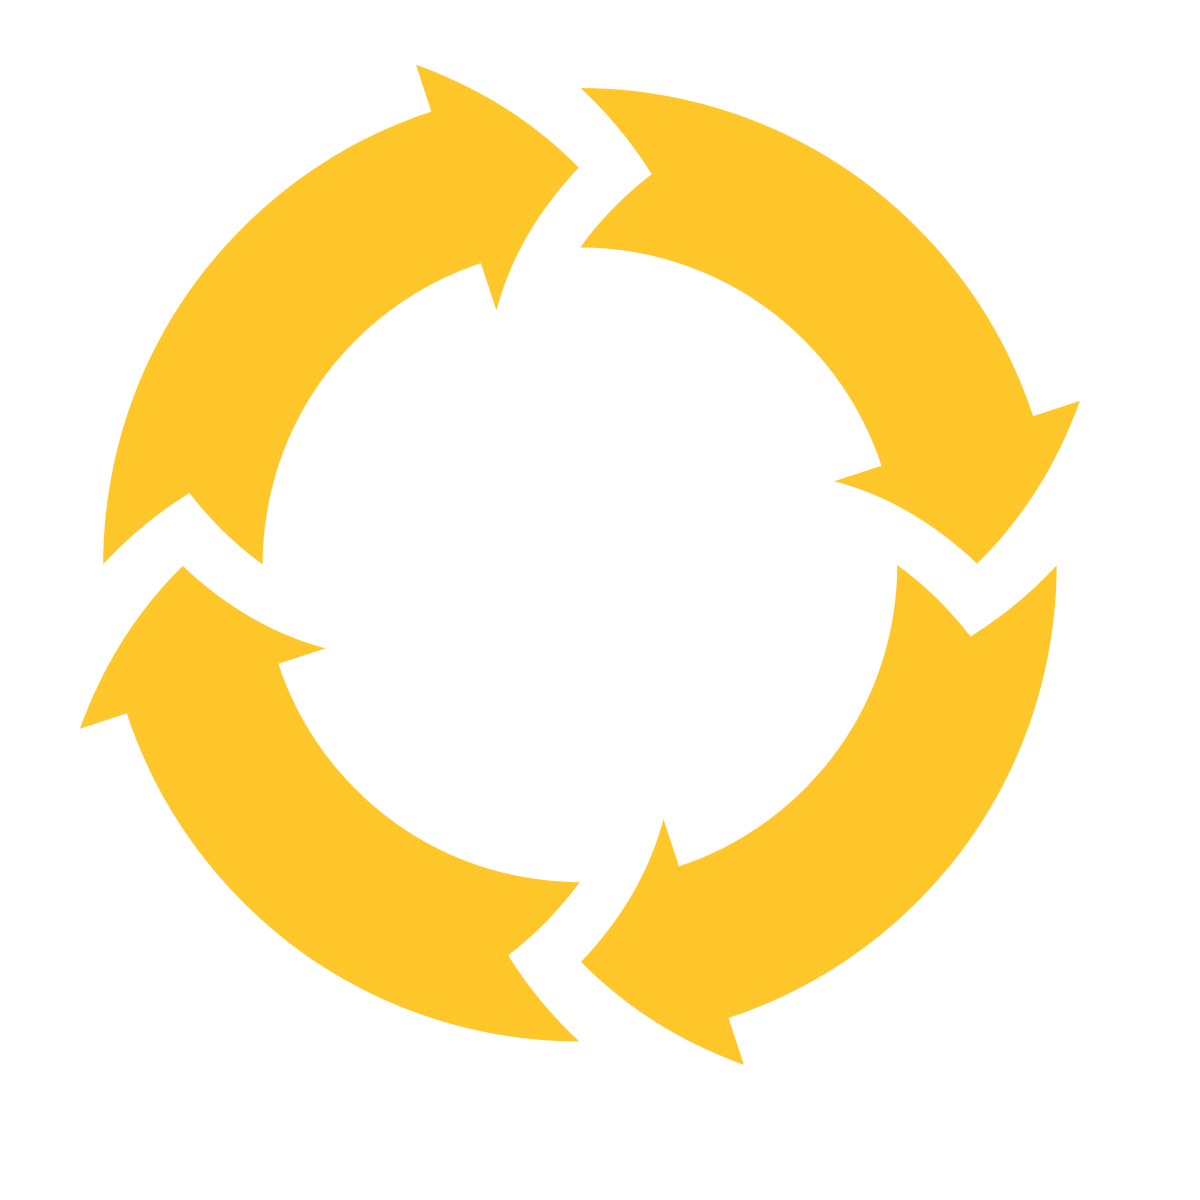 Four yellow arrows connecting to make a circle. 